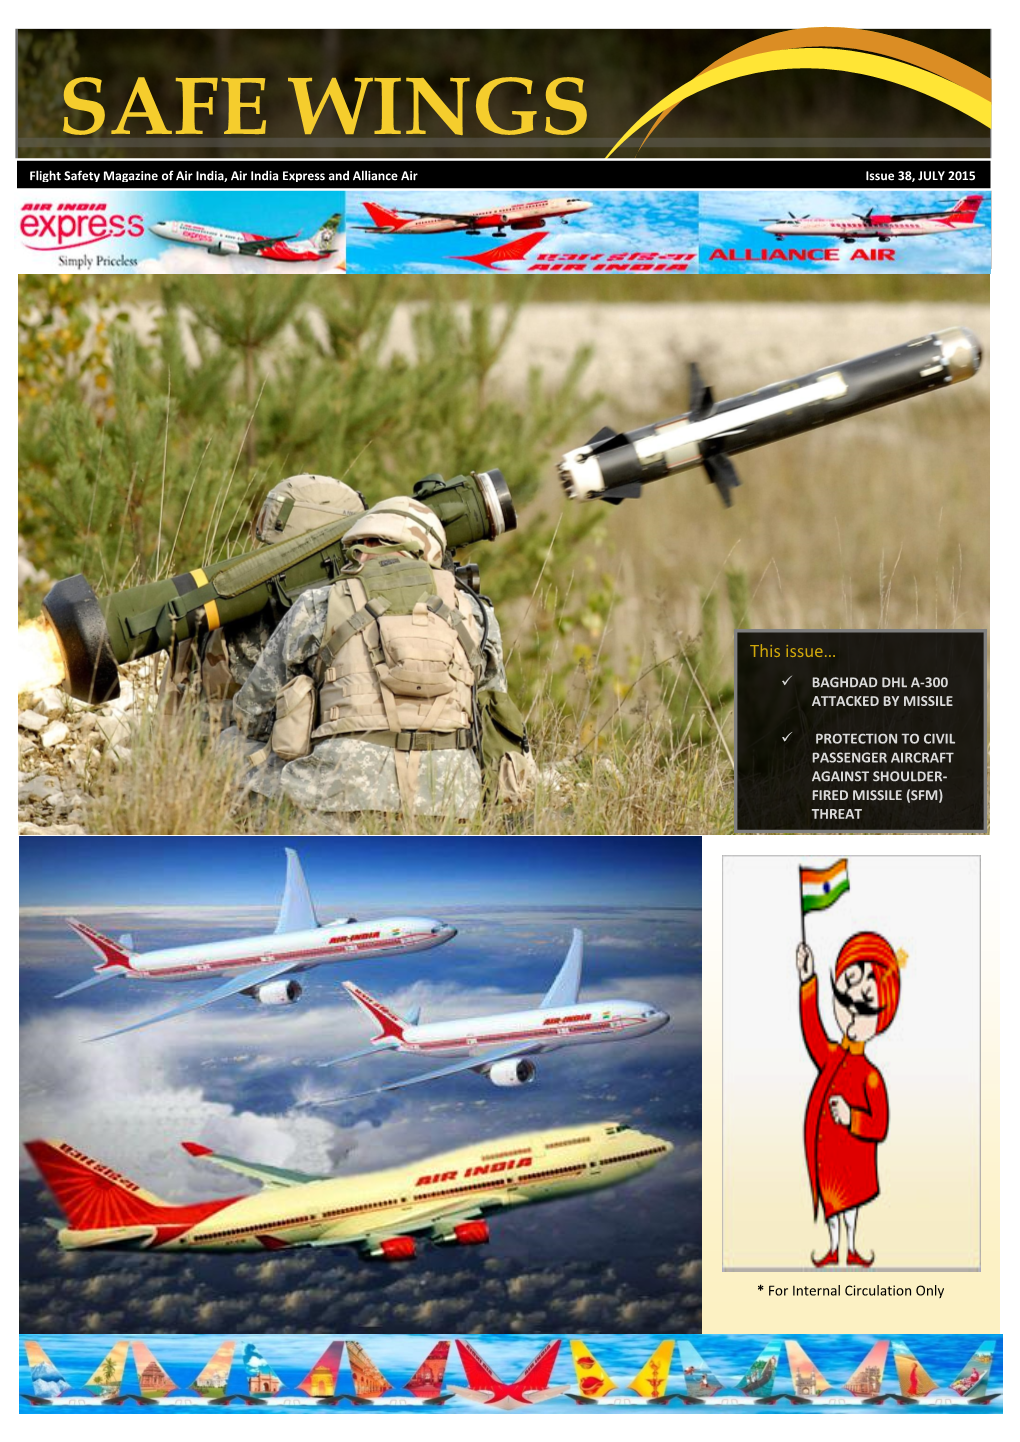 SAFE WINGS Flight Safety Magazine of Air India, Air India Express and Alliance Air Issue 38, JULY 2015